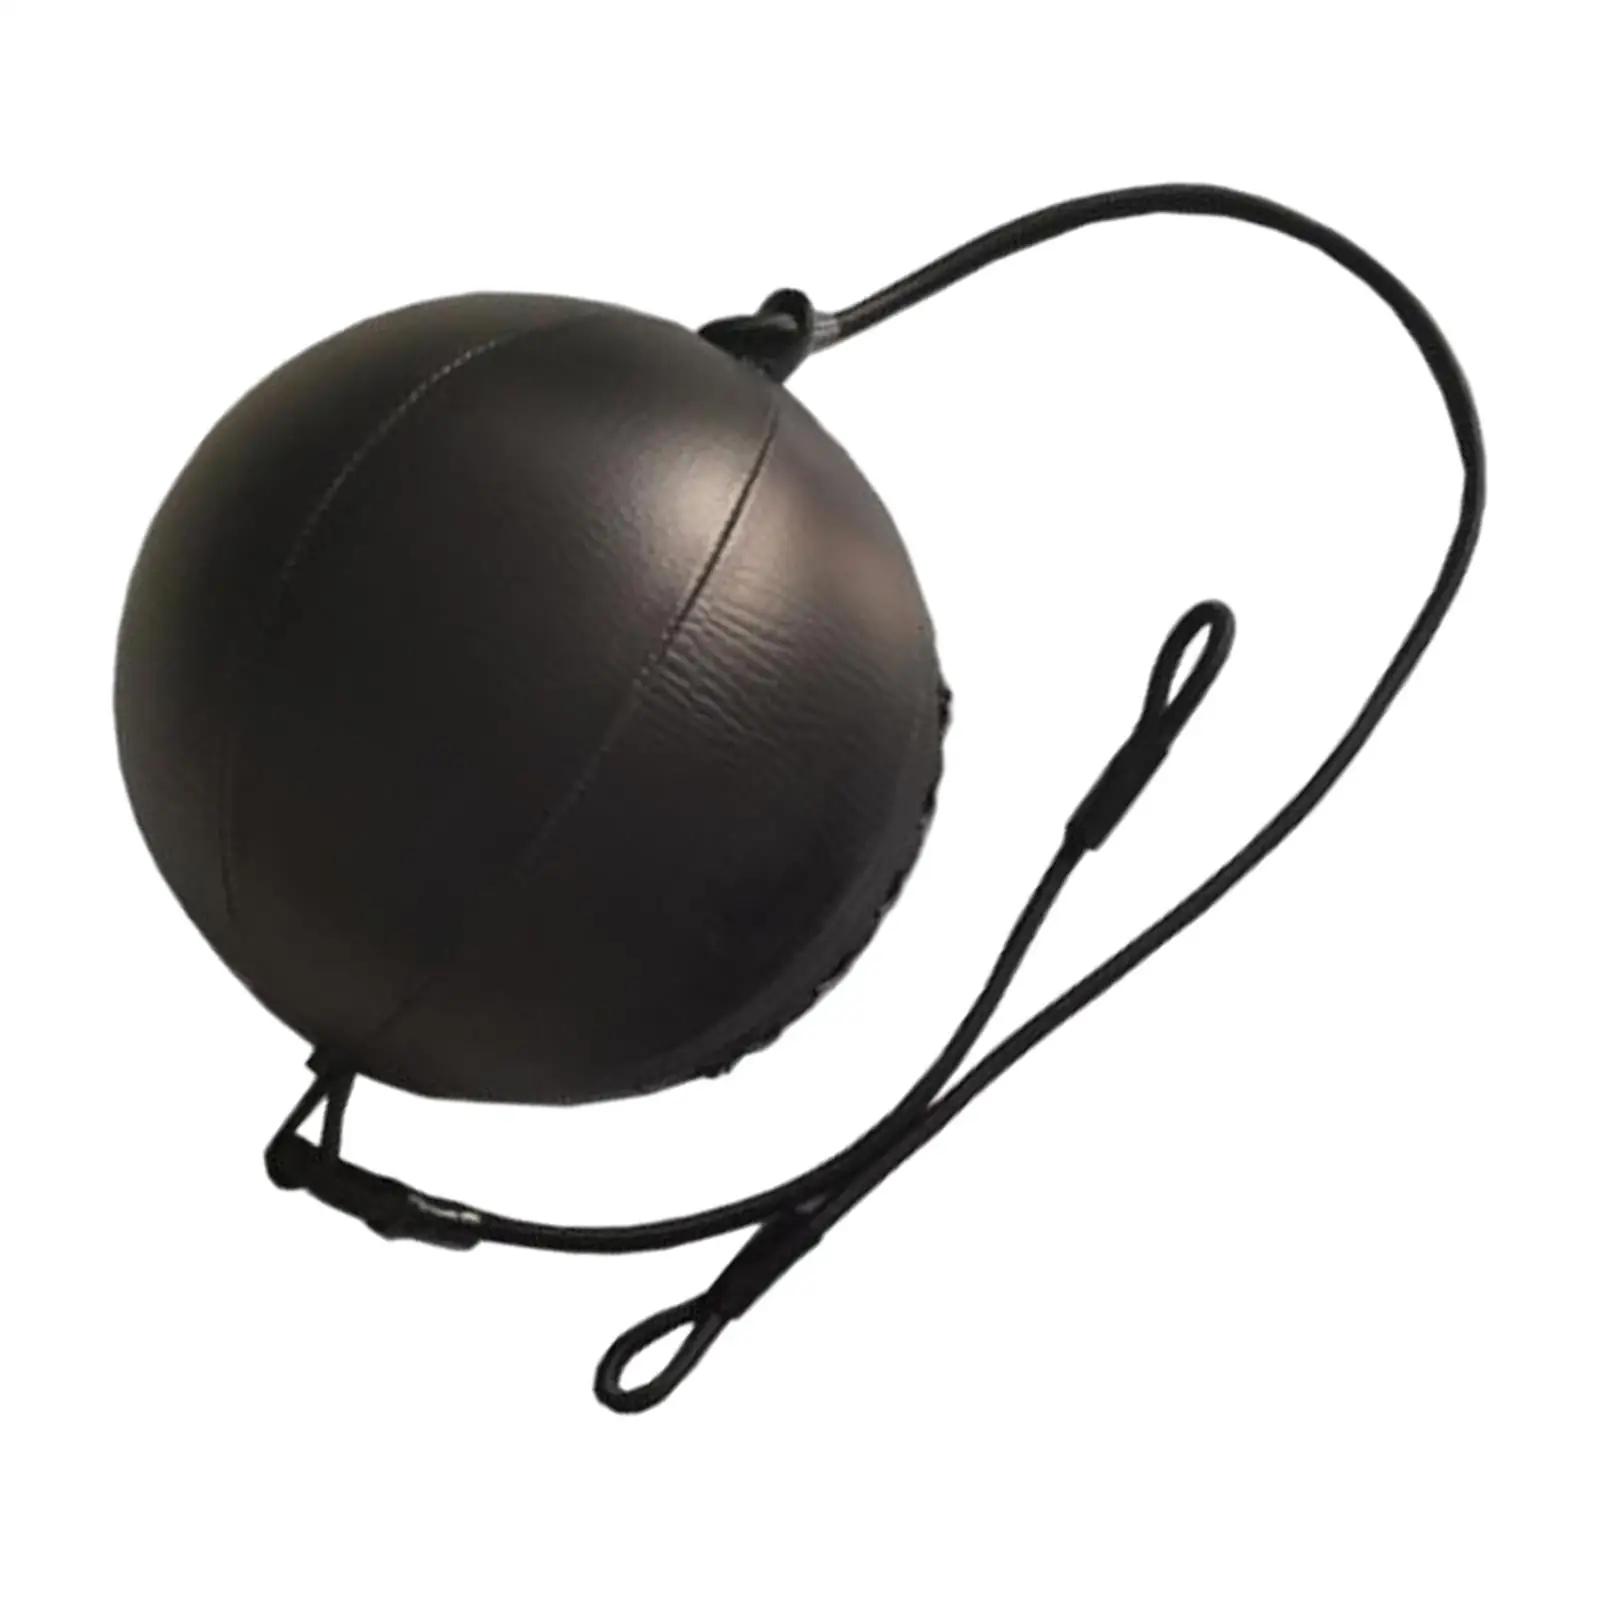 Double-ended PU ball from, bungee cord, for